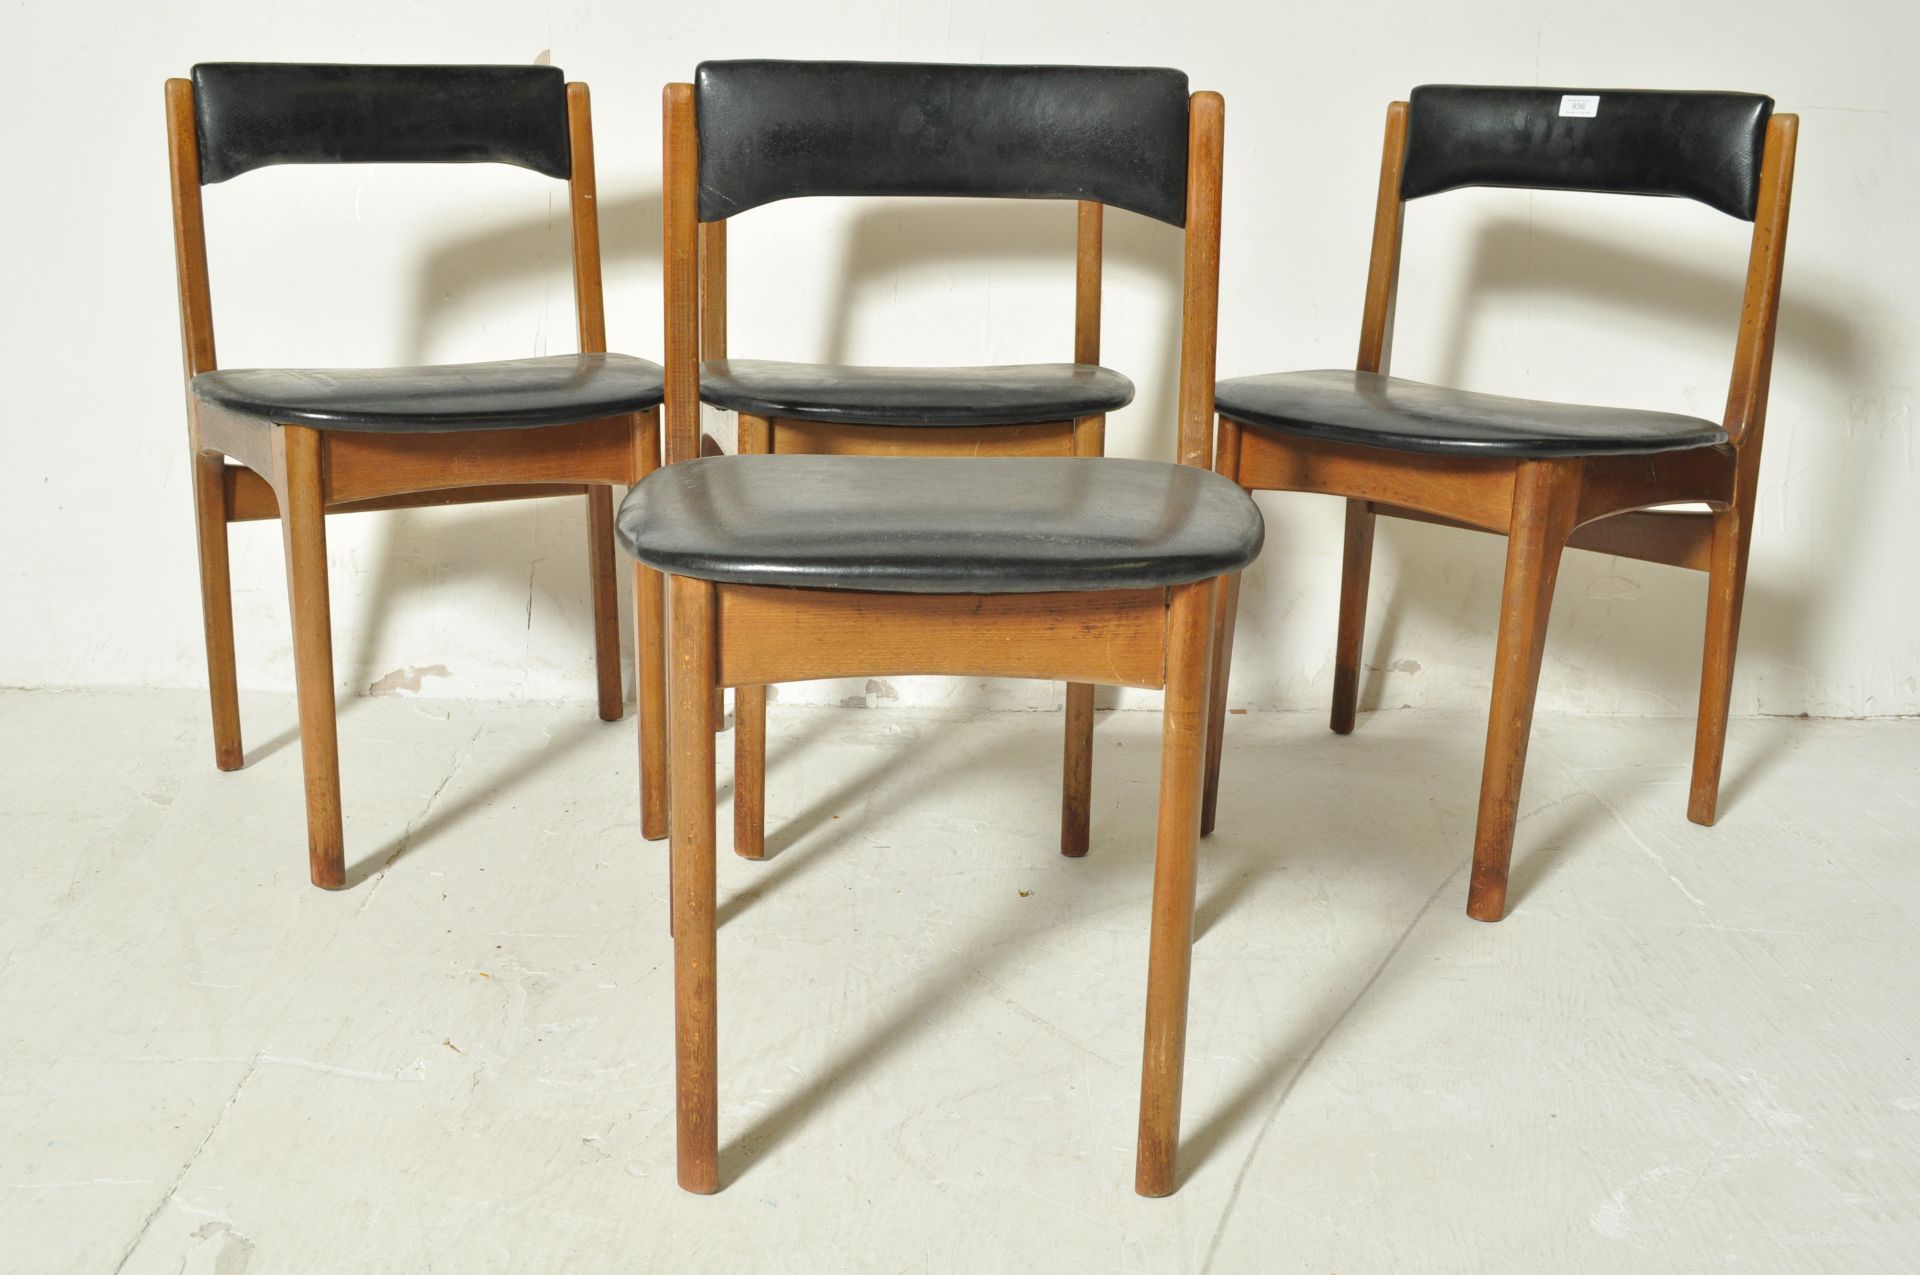 FOUR DANISH INSPIRED TEAK WOOD AND BLACK VINYL DINING CHAIRS